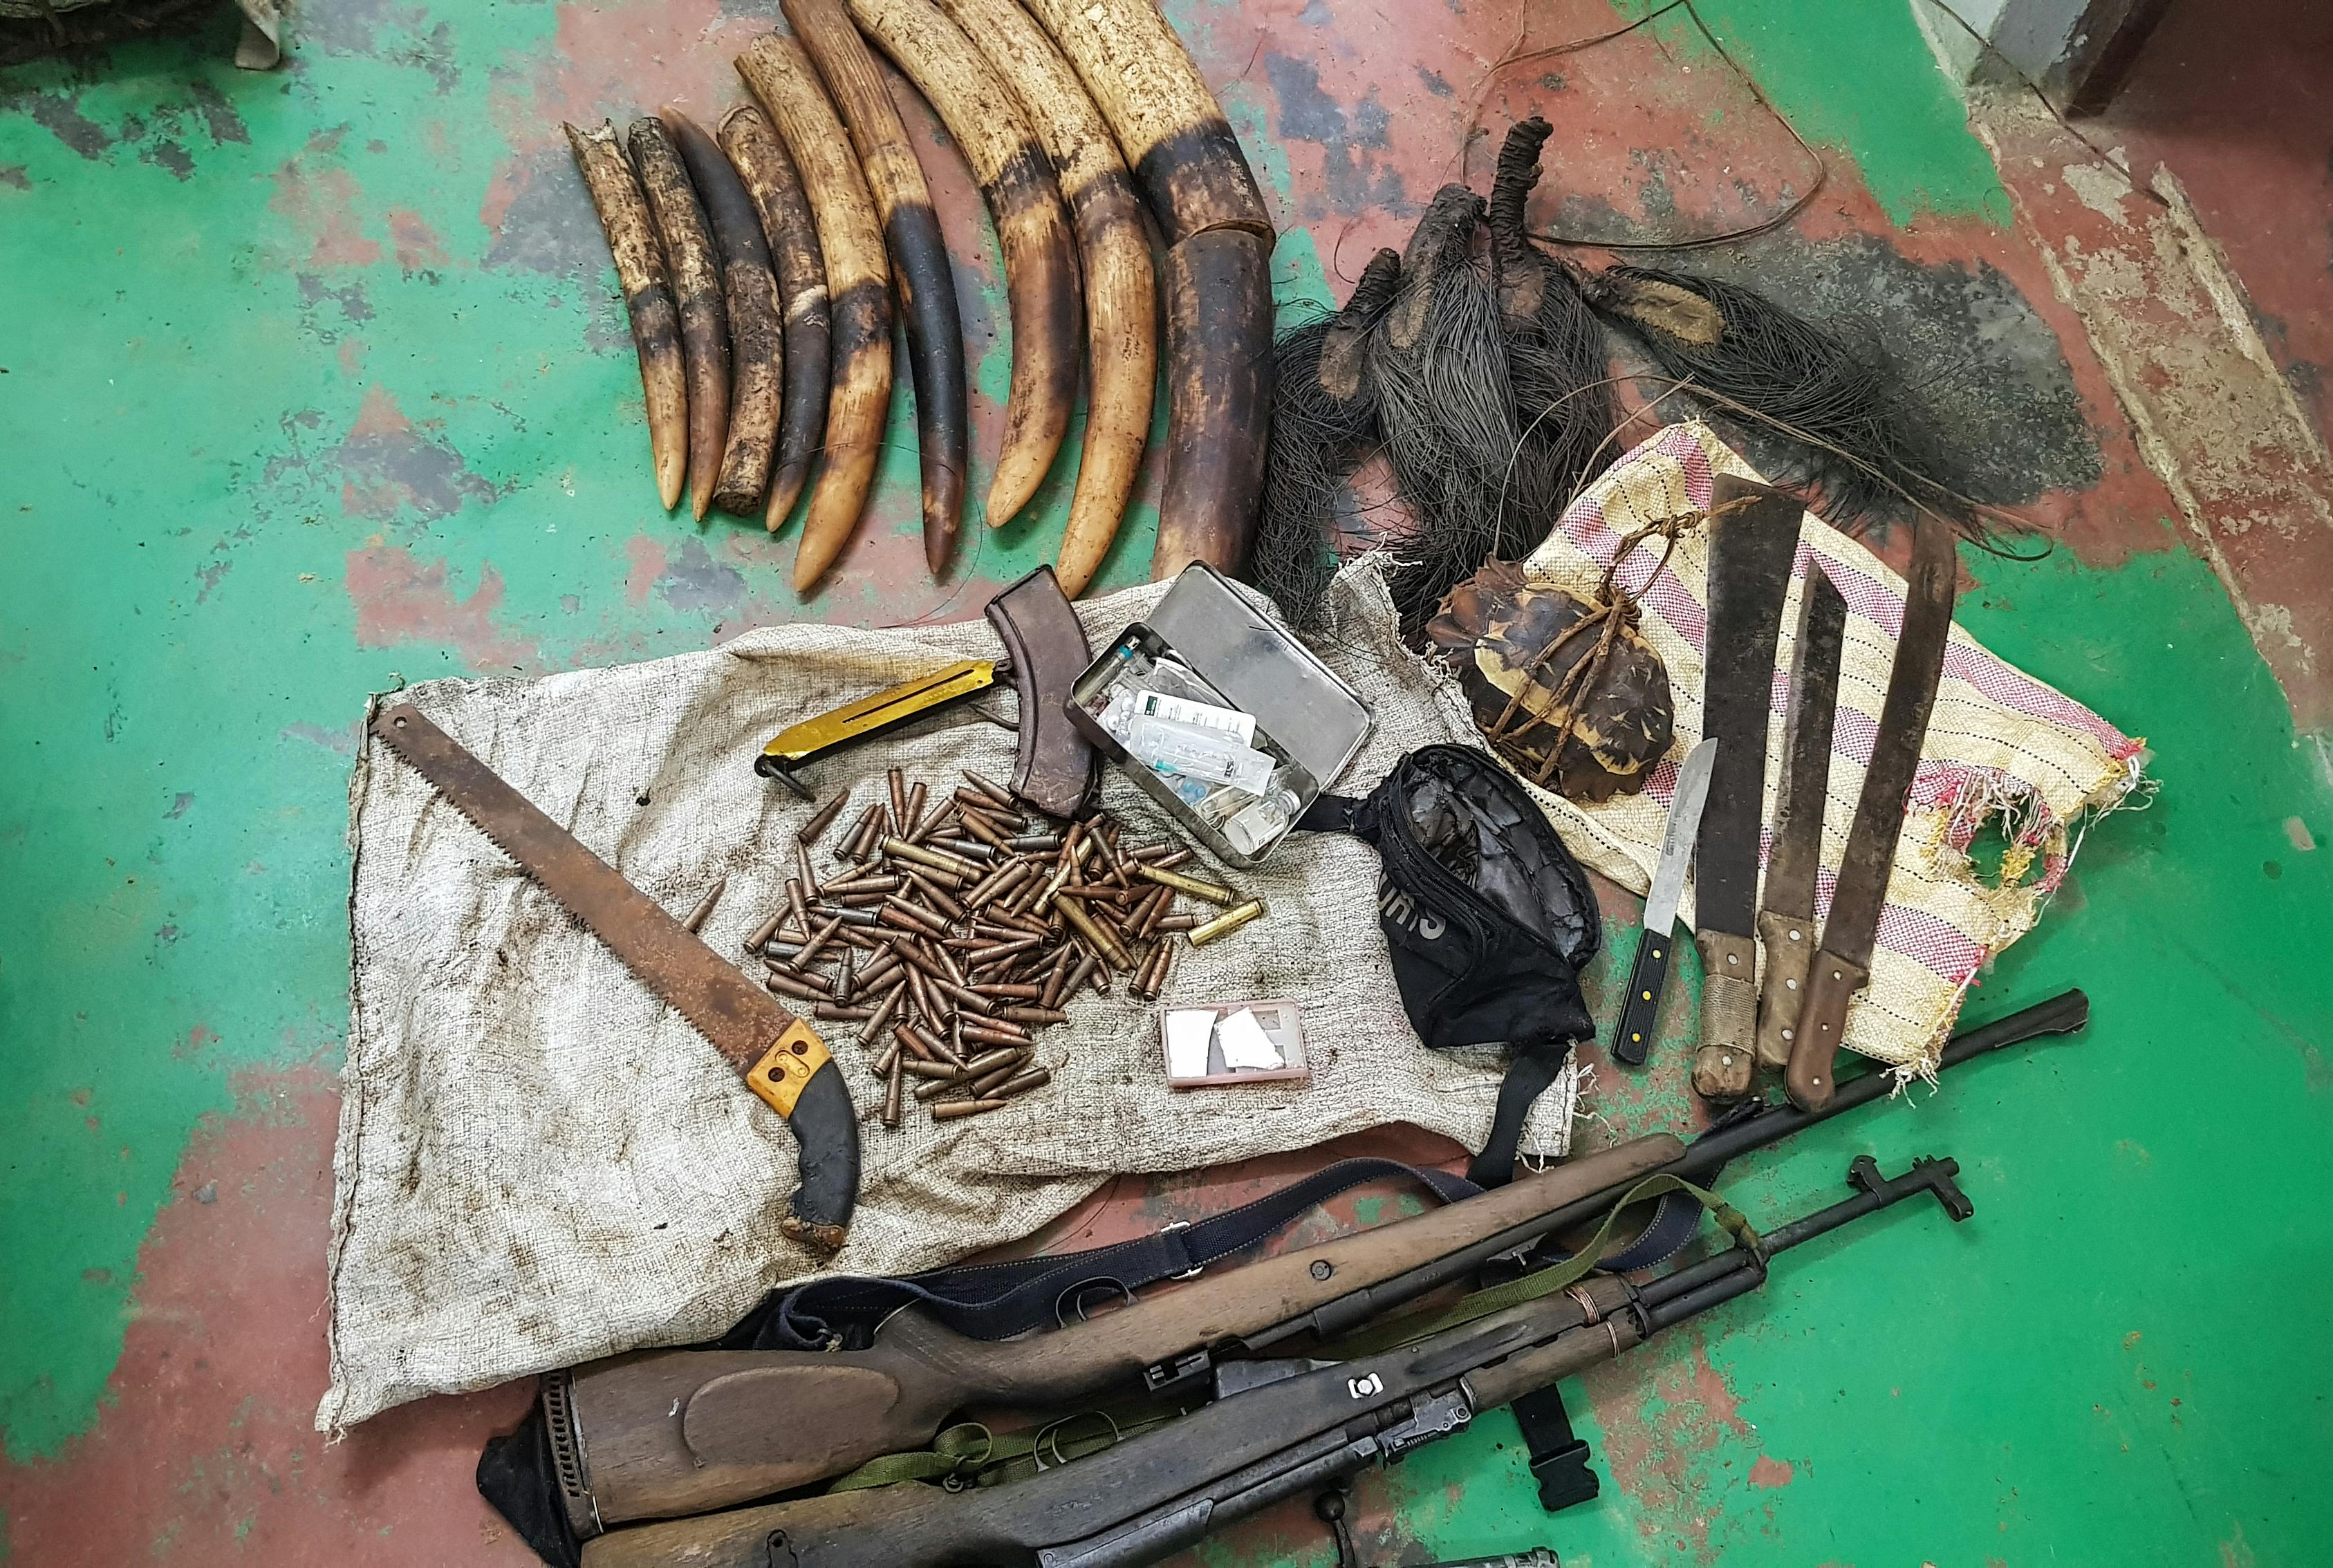 Professionalized Anti-poaching Operations Lead To Arrest and Conviction of Four Elephant Poachers in the Republic of Congo